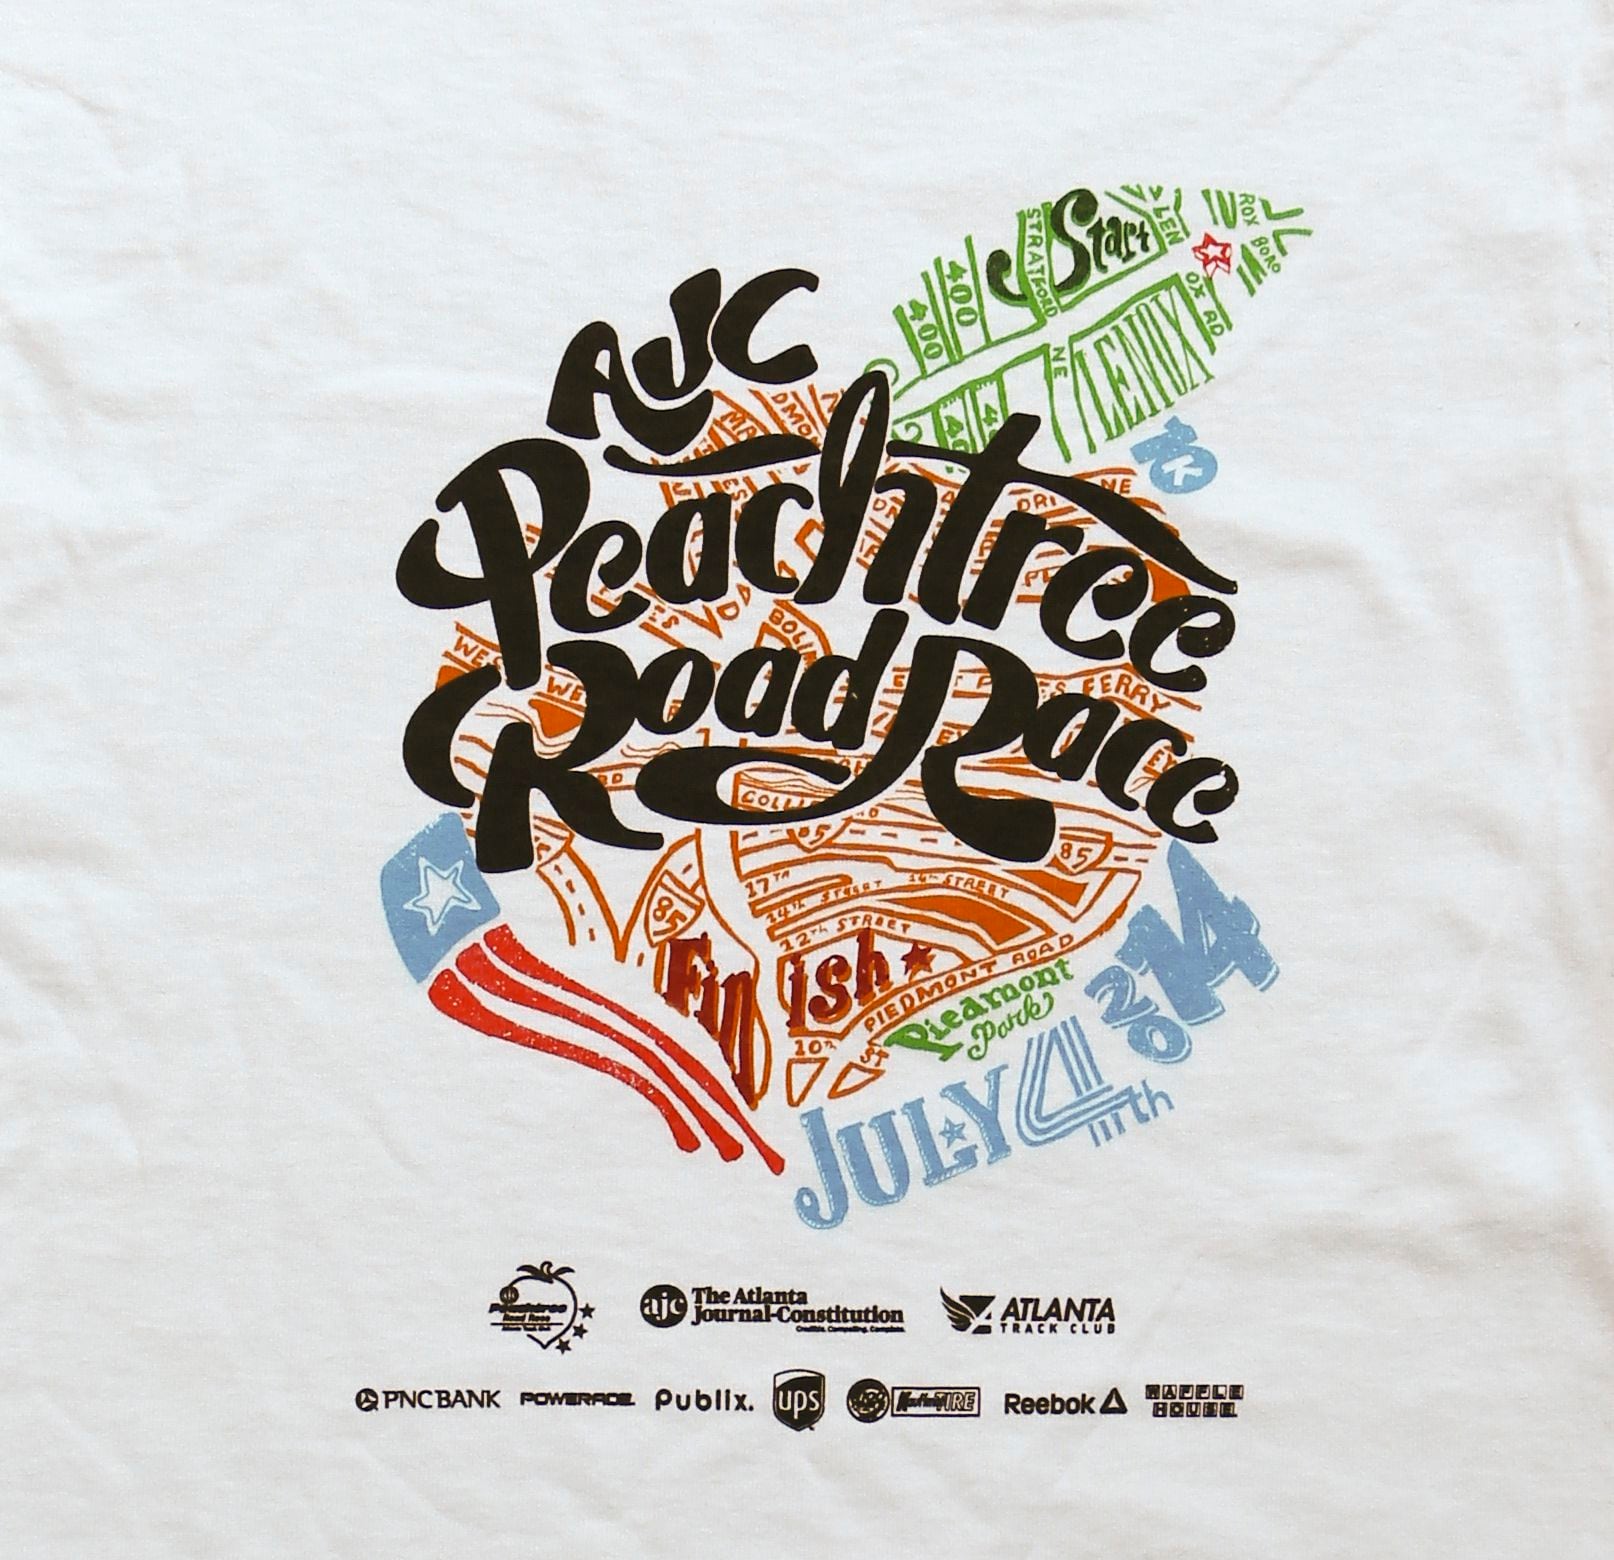 Photos by Peachtree AJC Road T-Shirts: decade Race